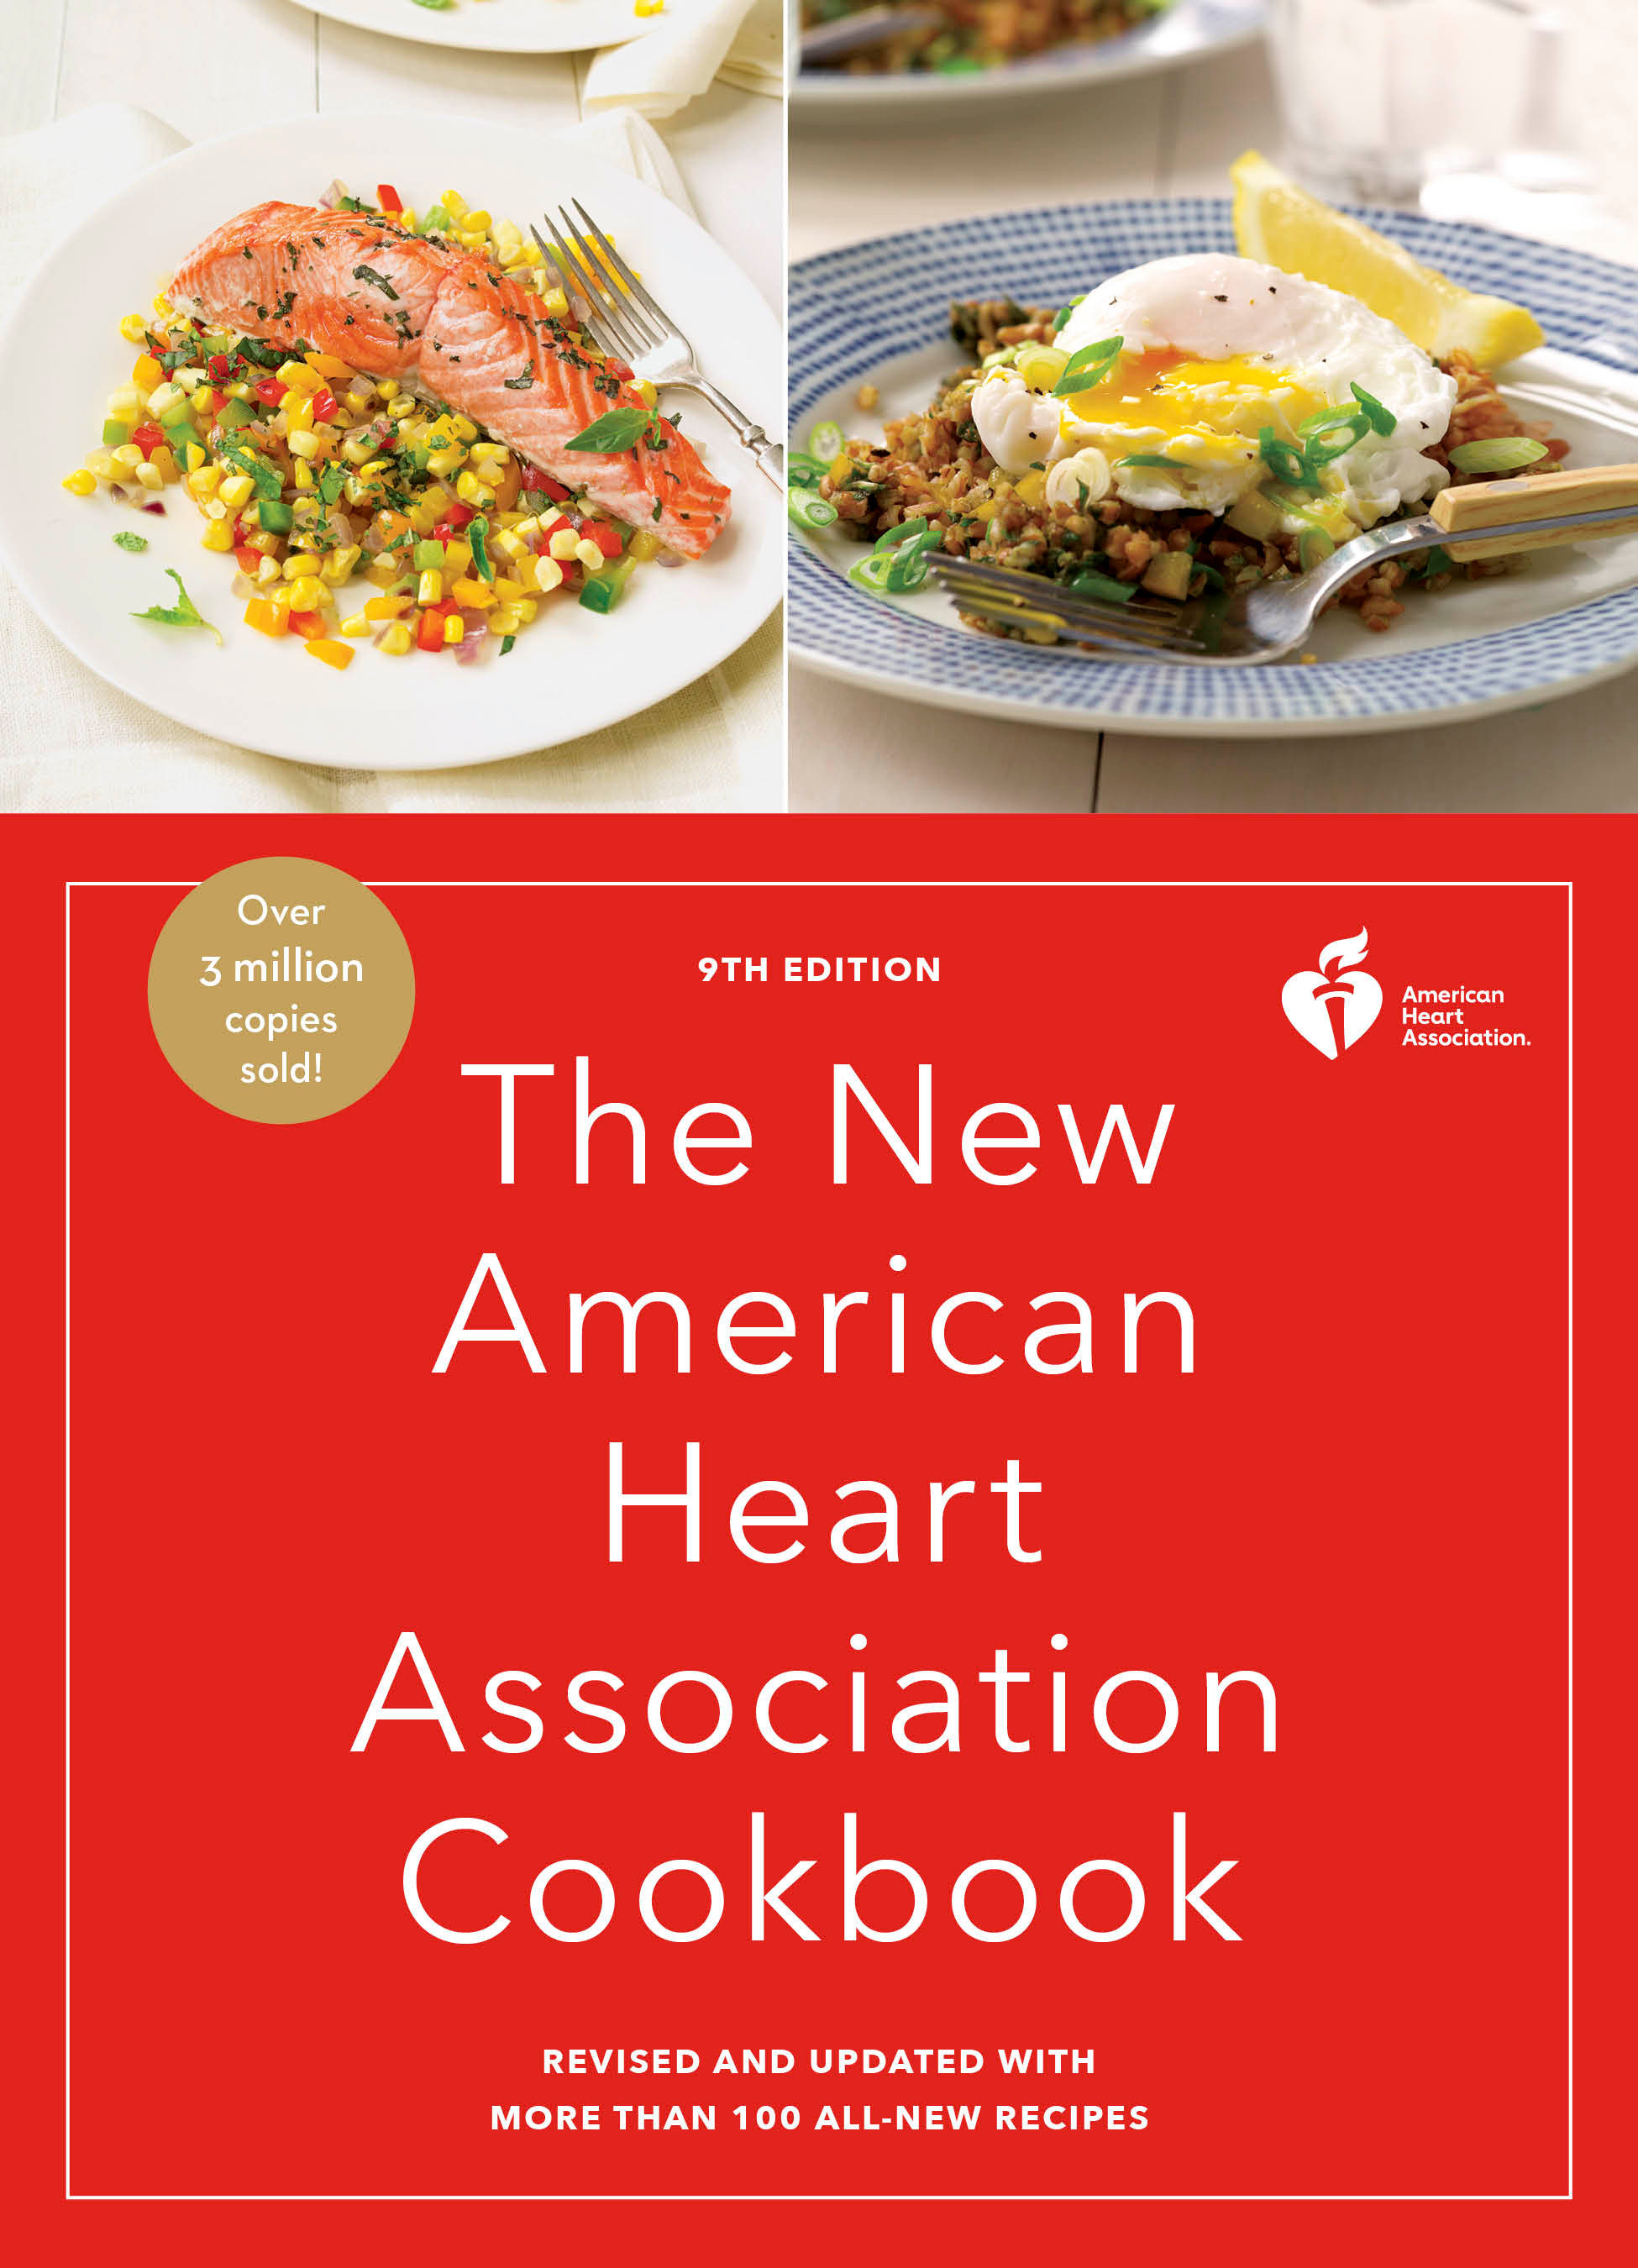 The new American Heart Association cookbook cover image